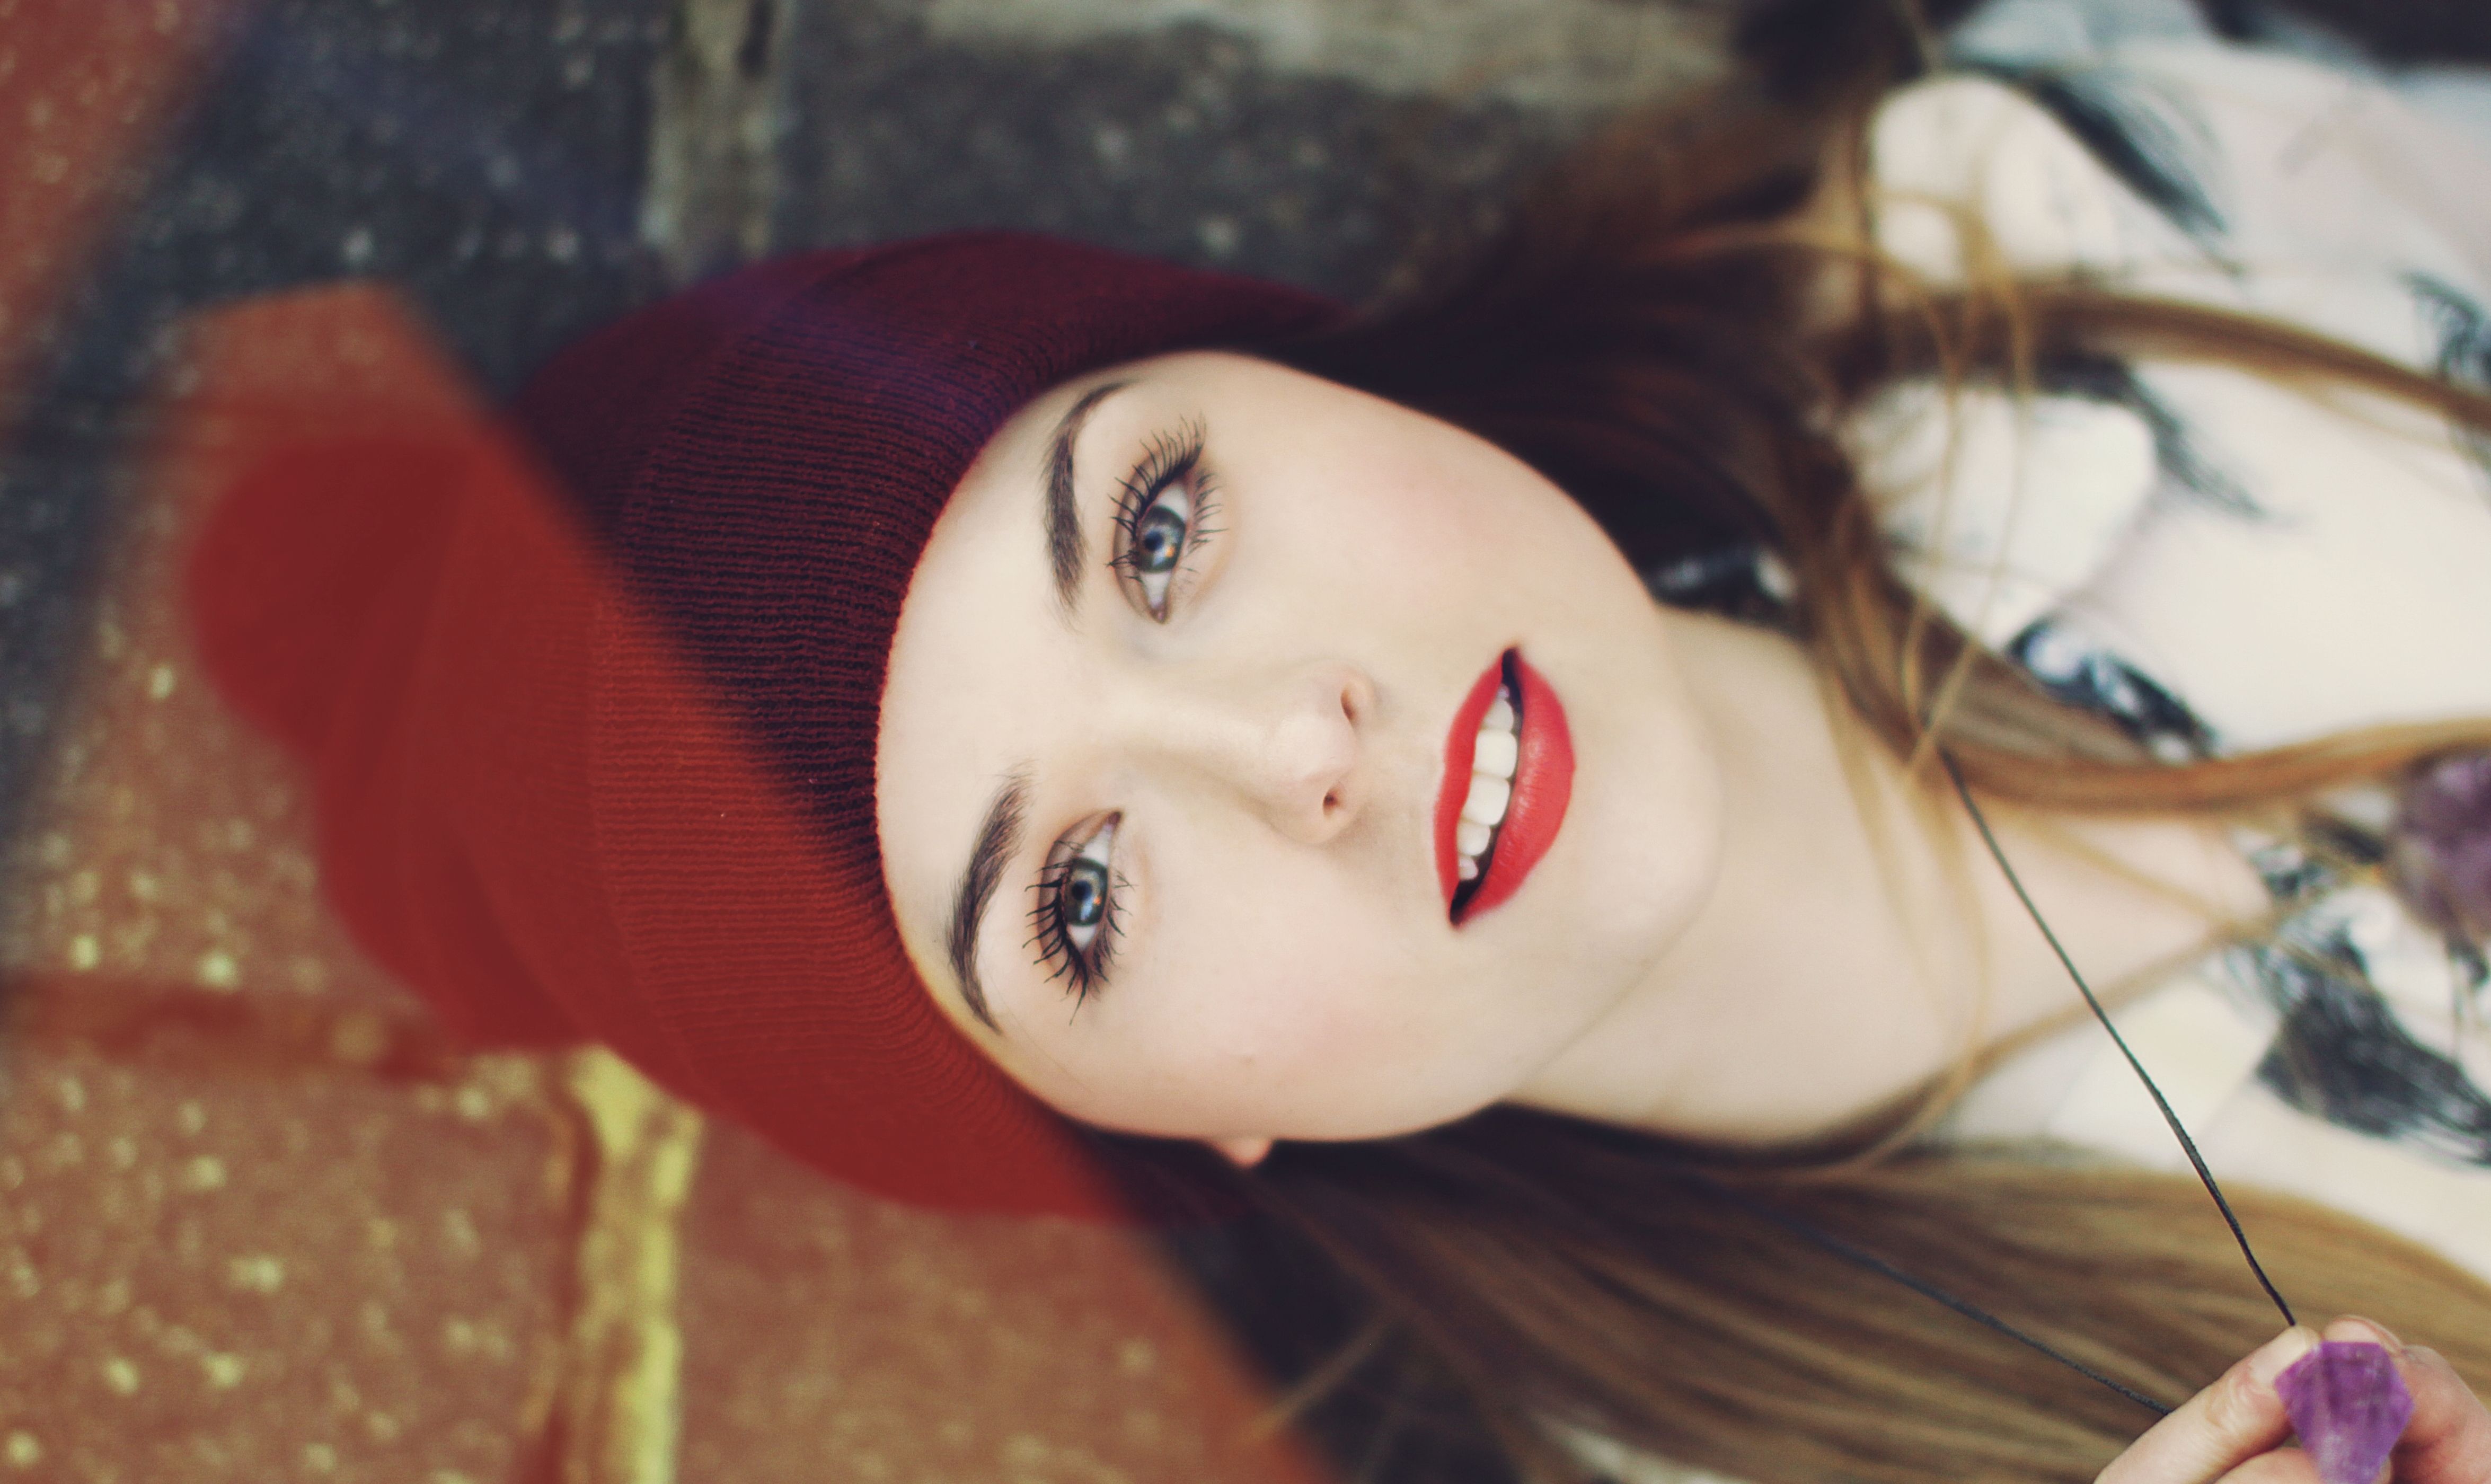 Download wallpaper eyes, look, girl, face, eyelashes, background, widescreen, Wallpaper, mood, hat, blur, teeth, makeup, lipstick, lips, wallpaper, section mood in resolution 4700x2800